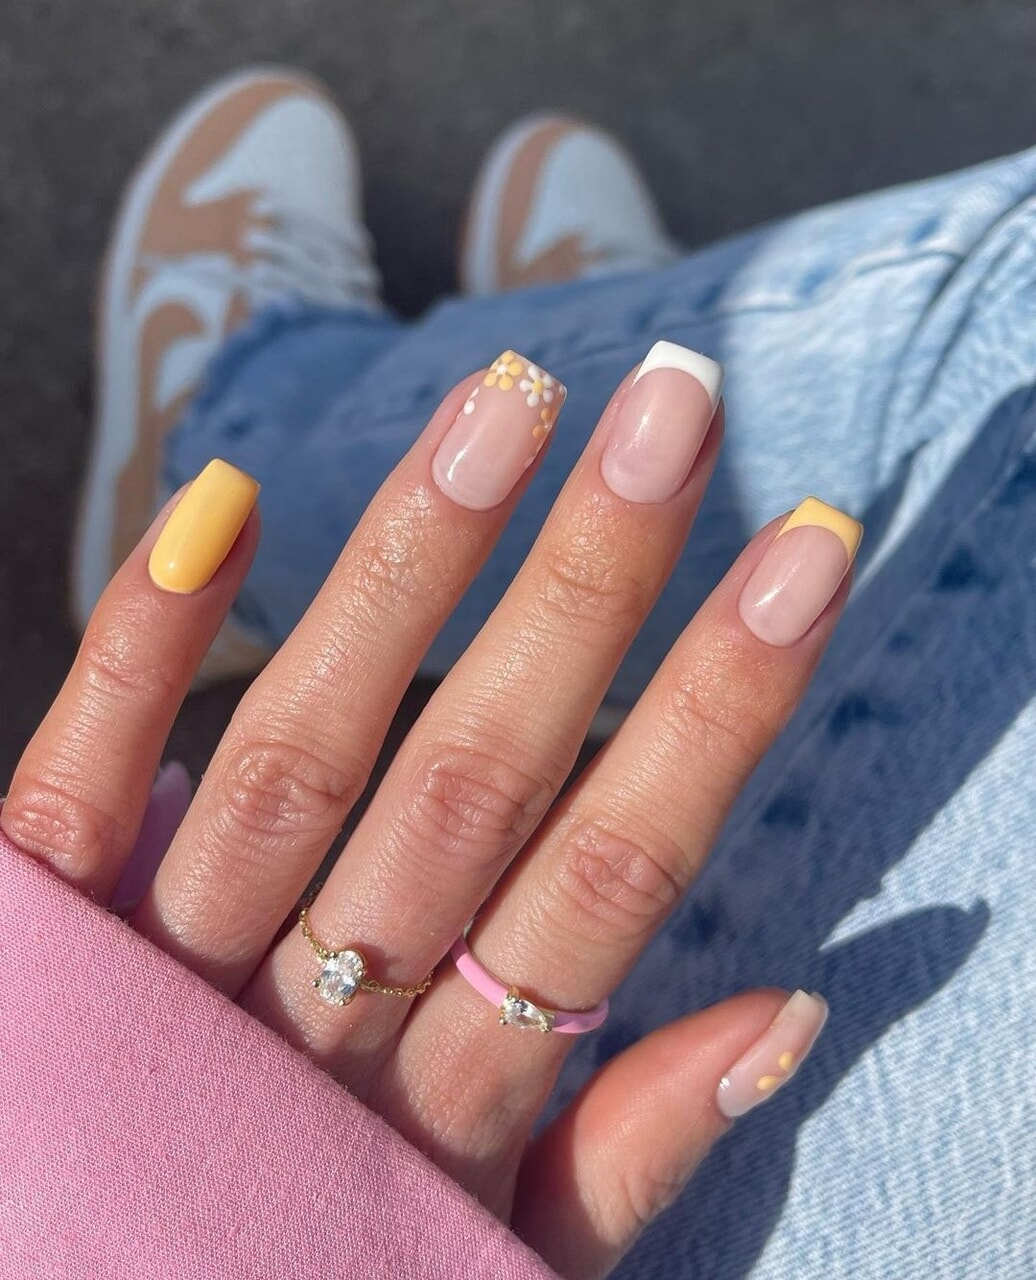 Yellow summer nails with french tips and flowers